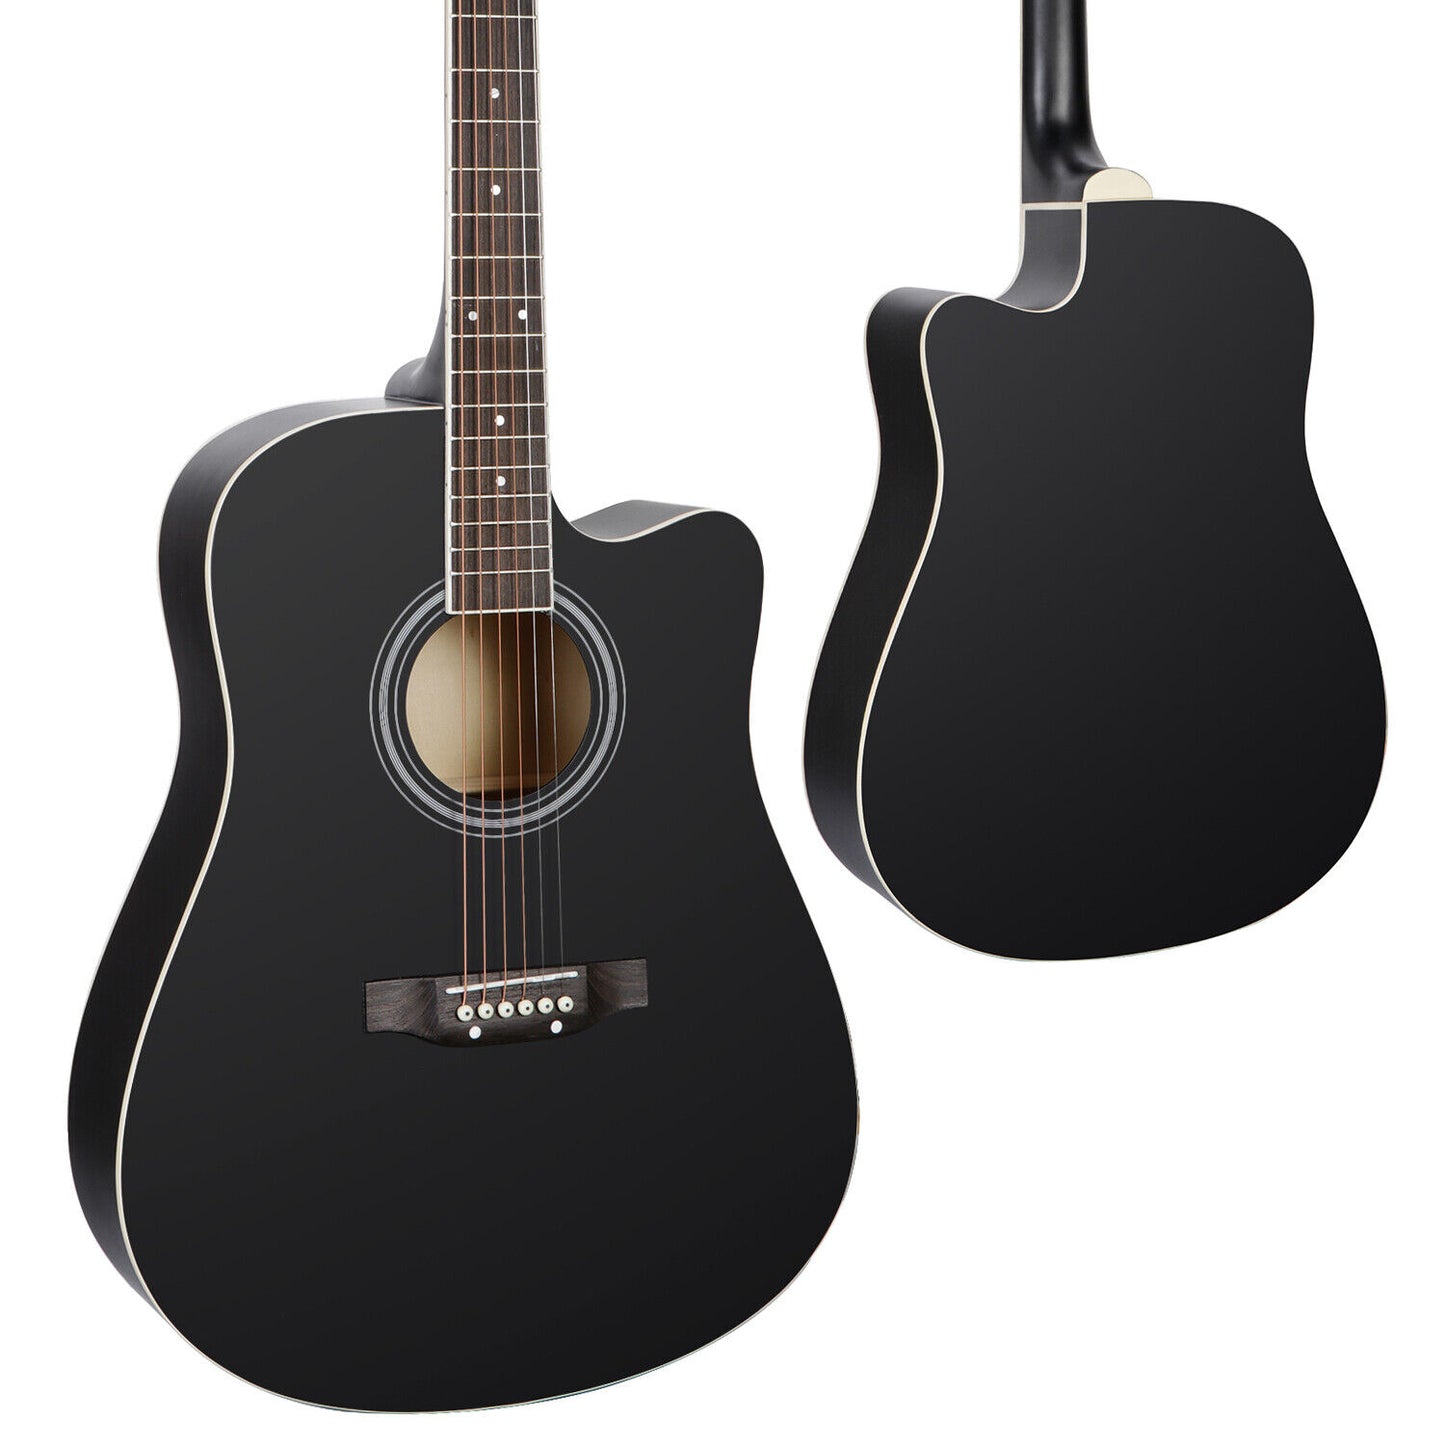 Black 41" Full Size Beginner Acoustic Guitar with Case Strap Capo Strings Tuner